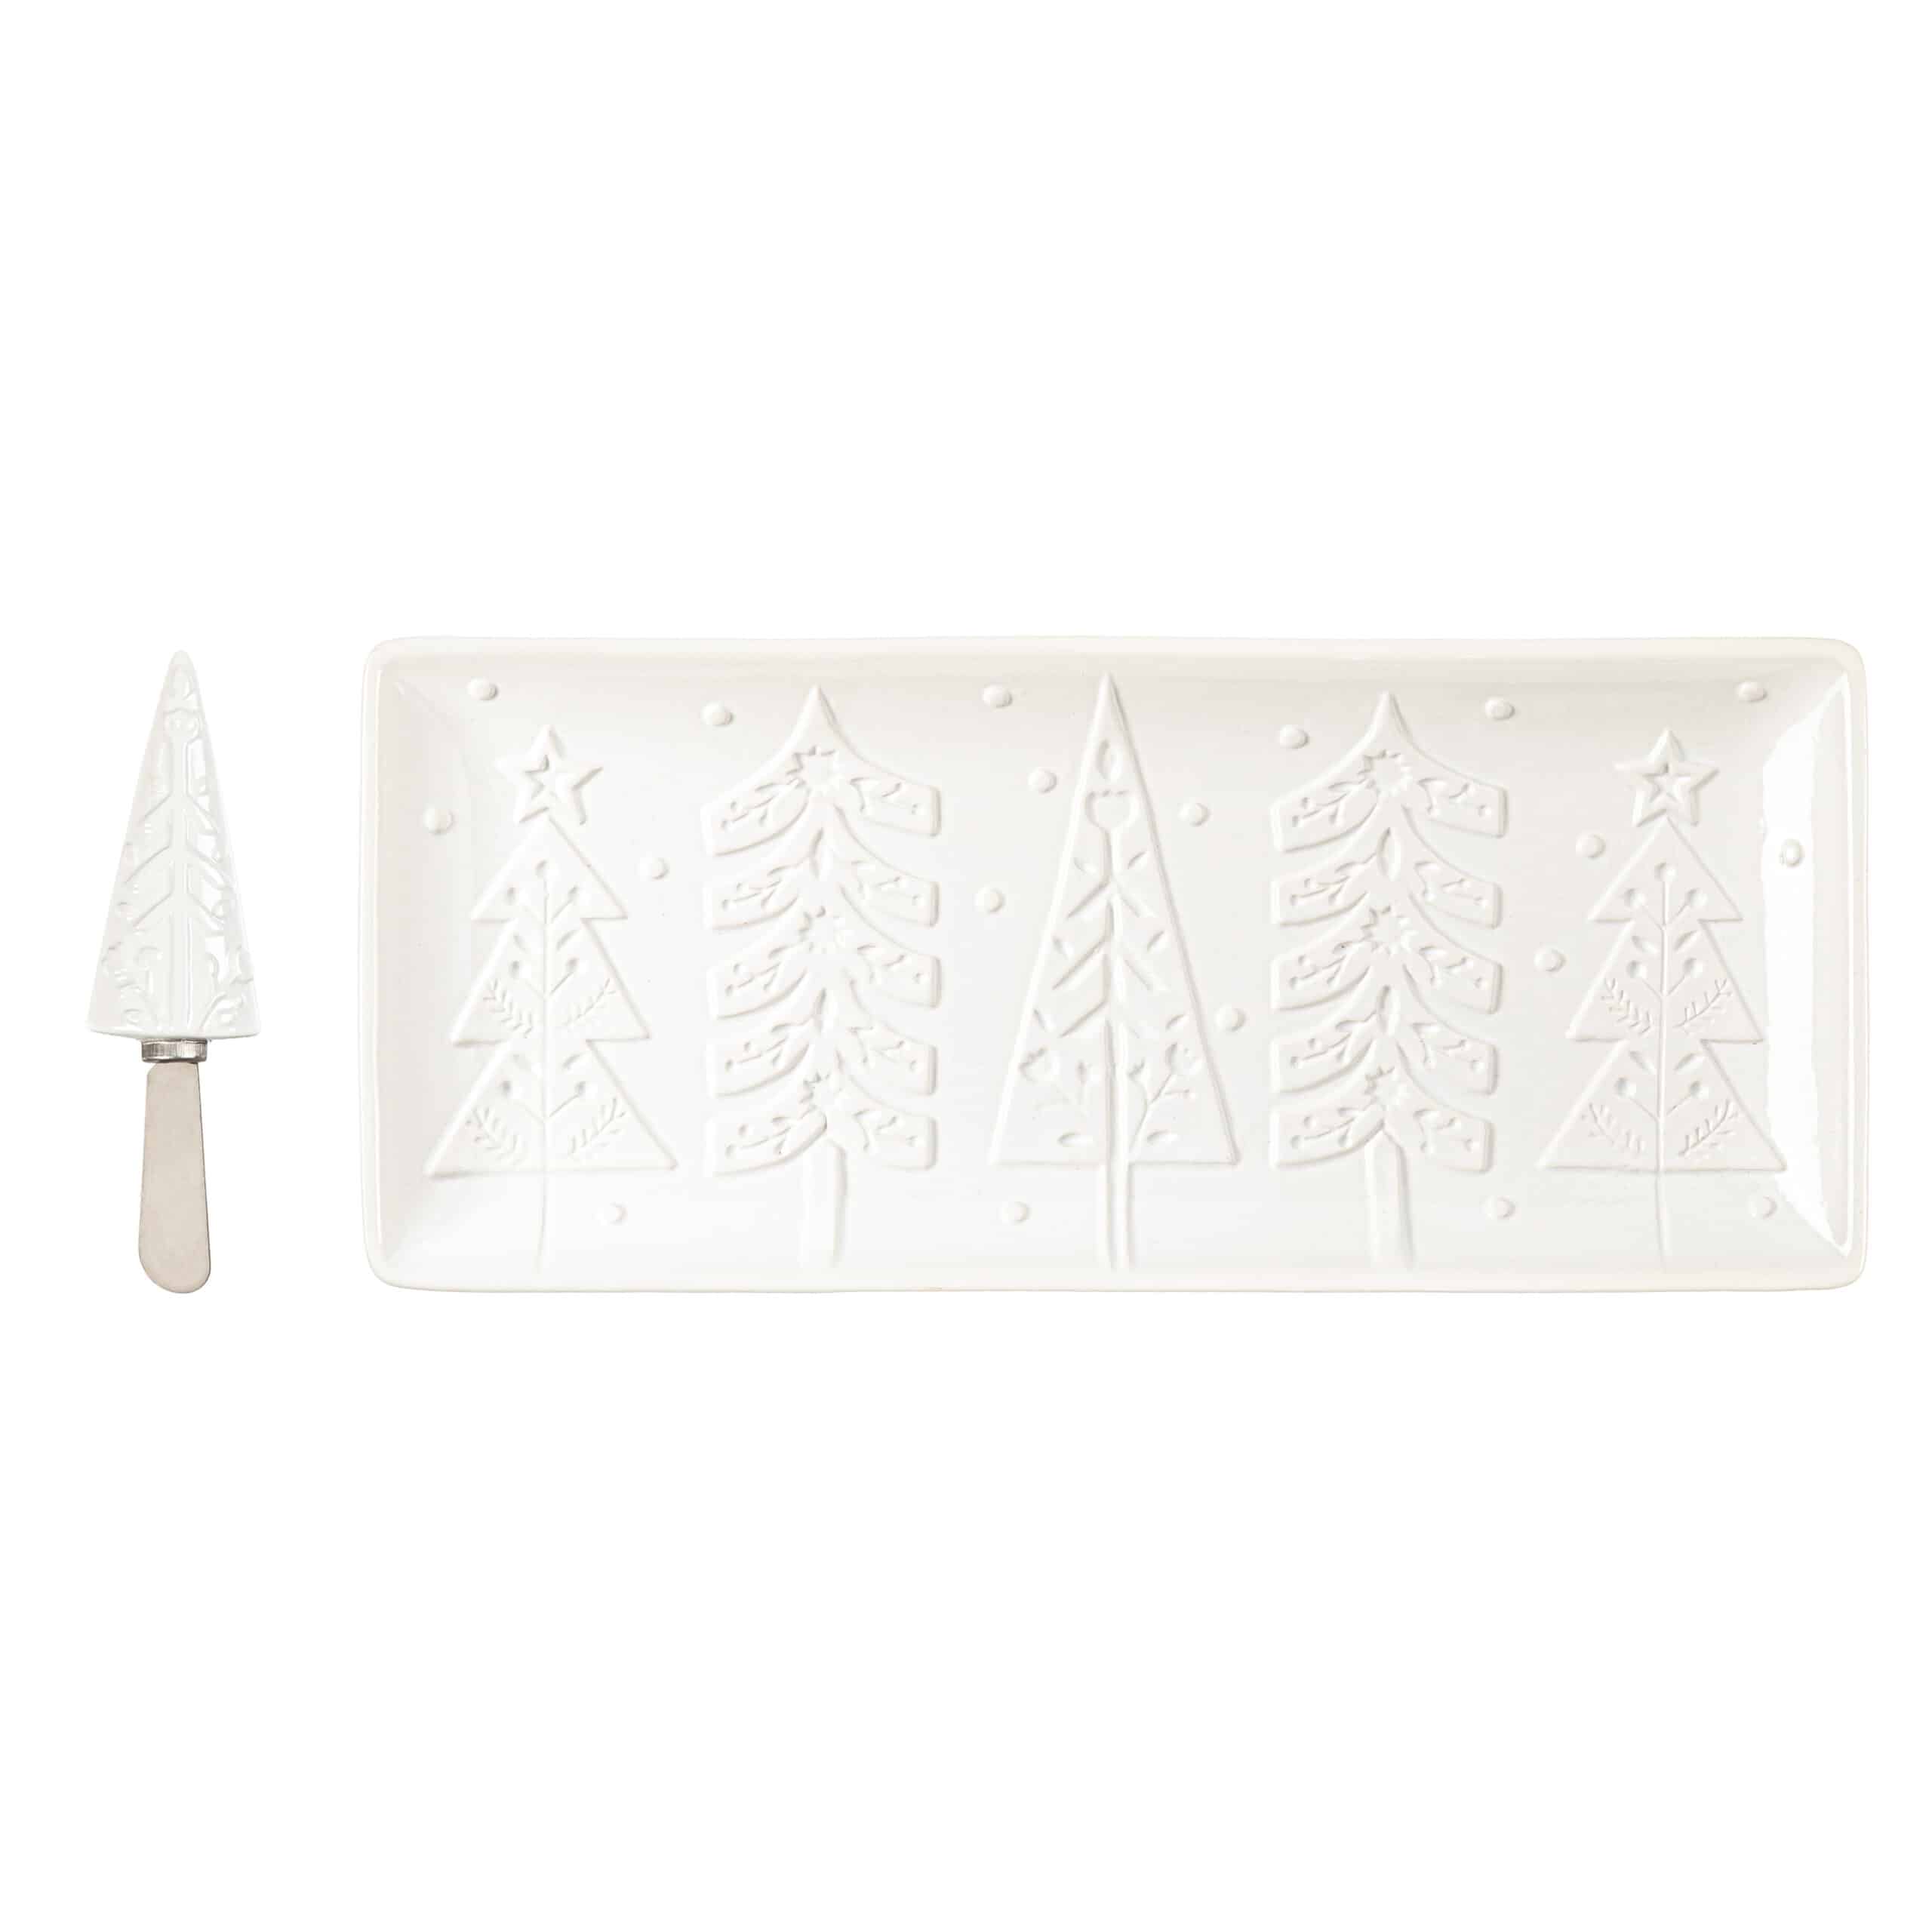 Serving Tray & Spreader: Nordic Woods image